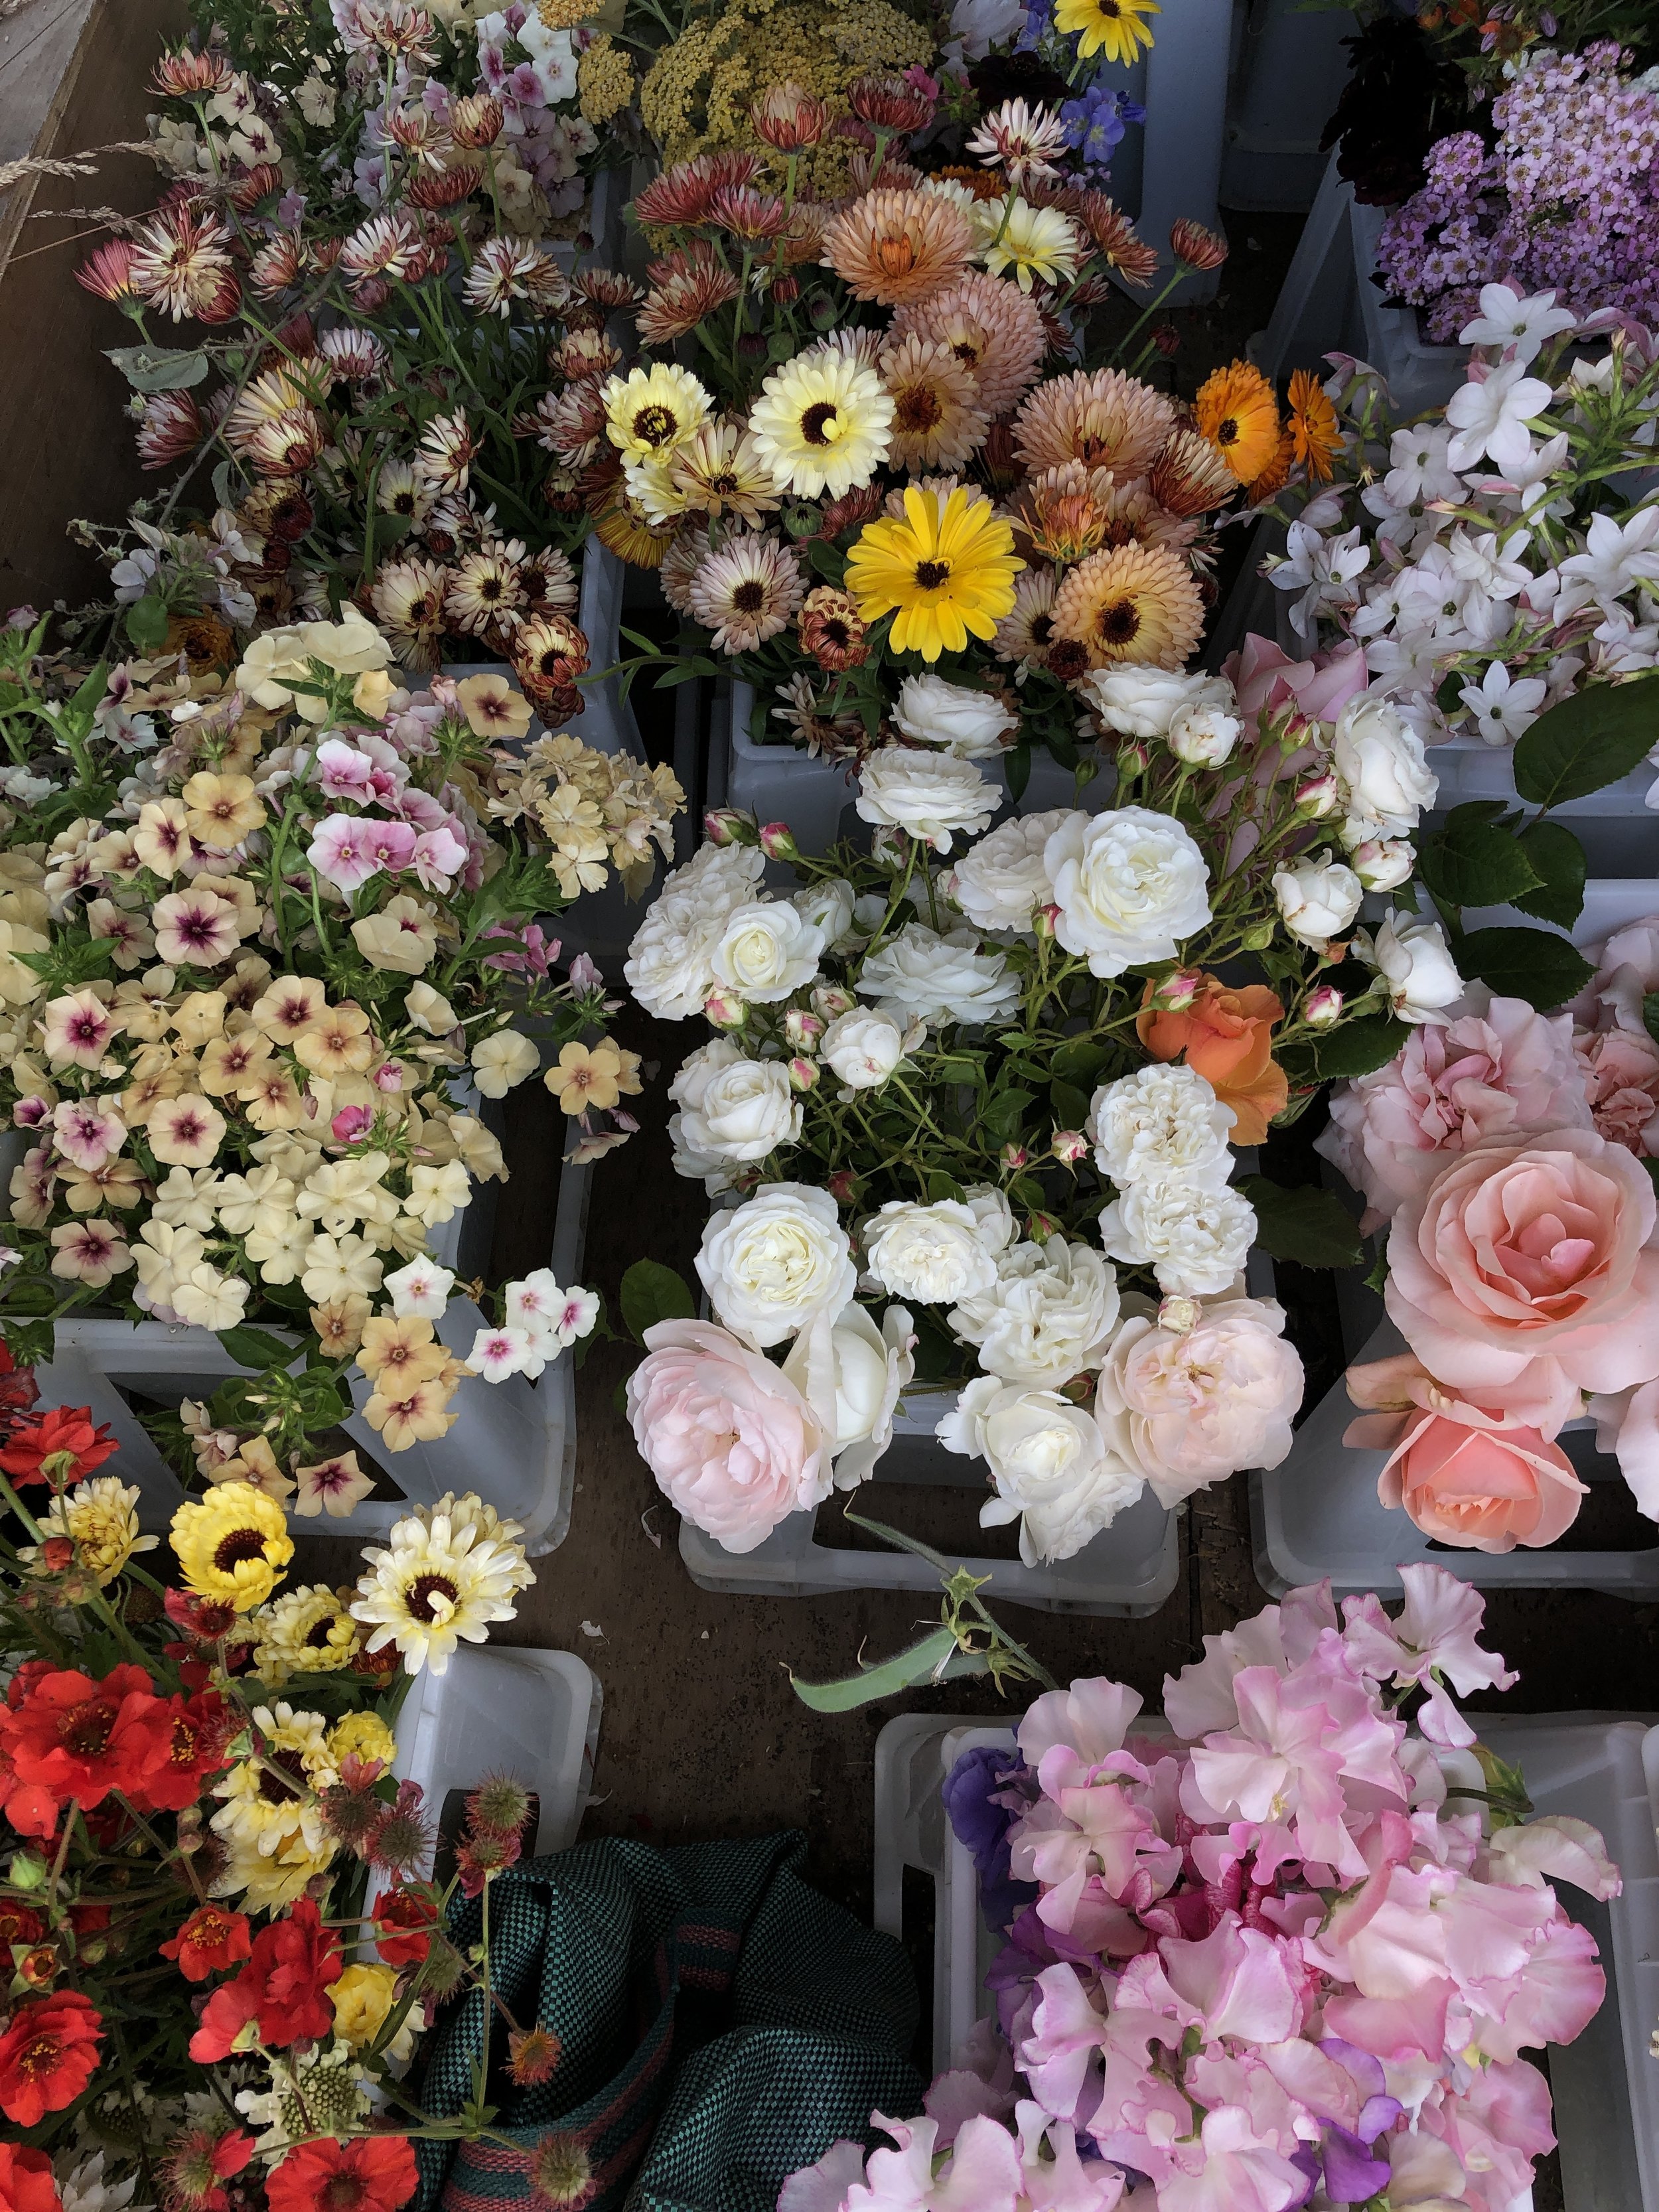 AUGUST 2019 - News from our London flower studio and Hampshire flower farm